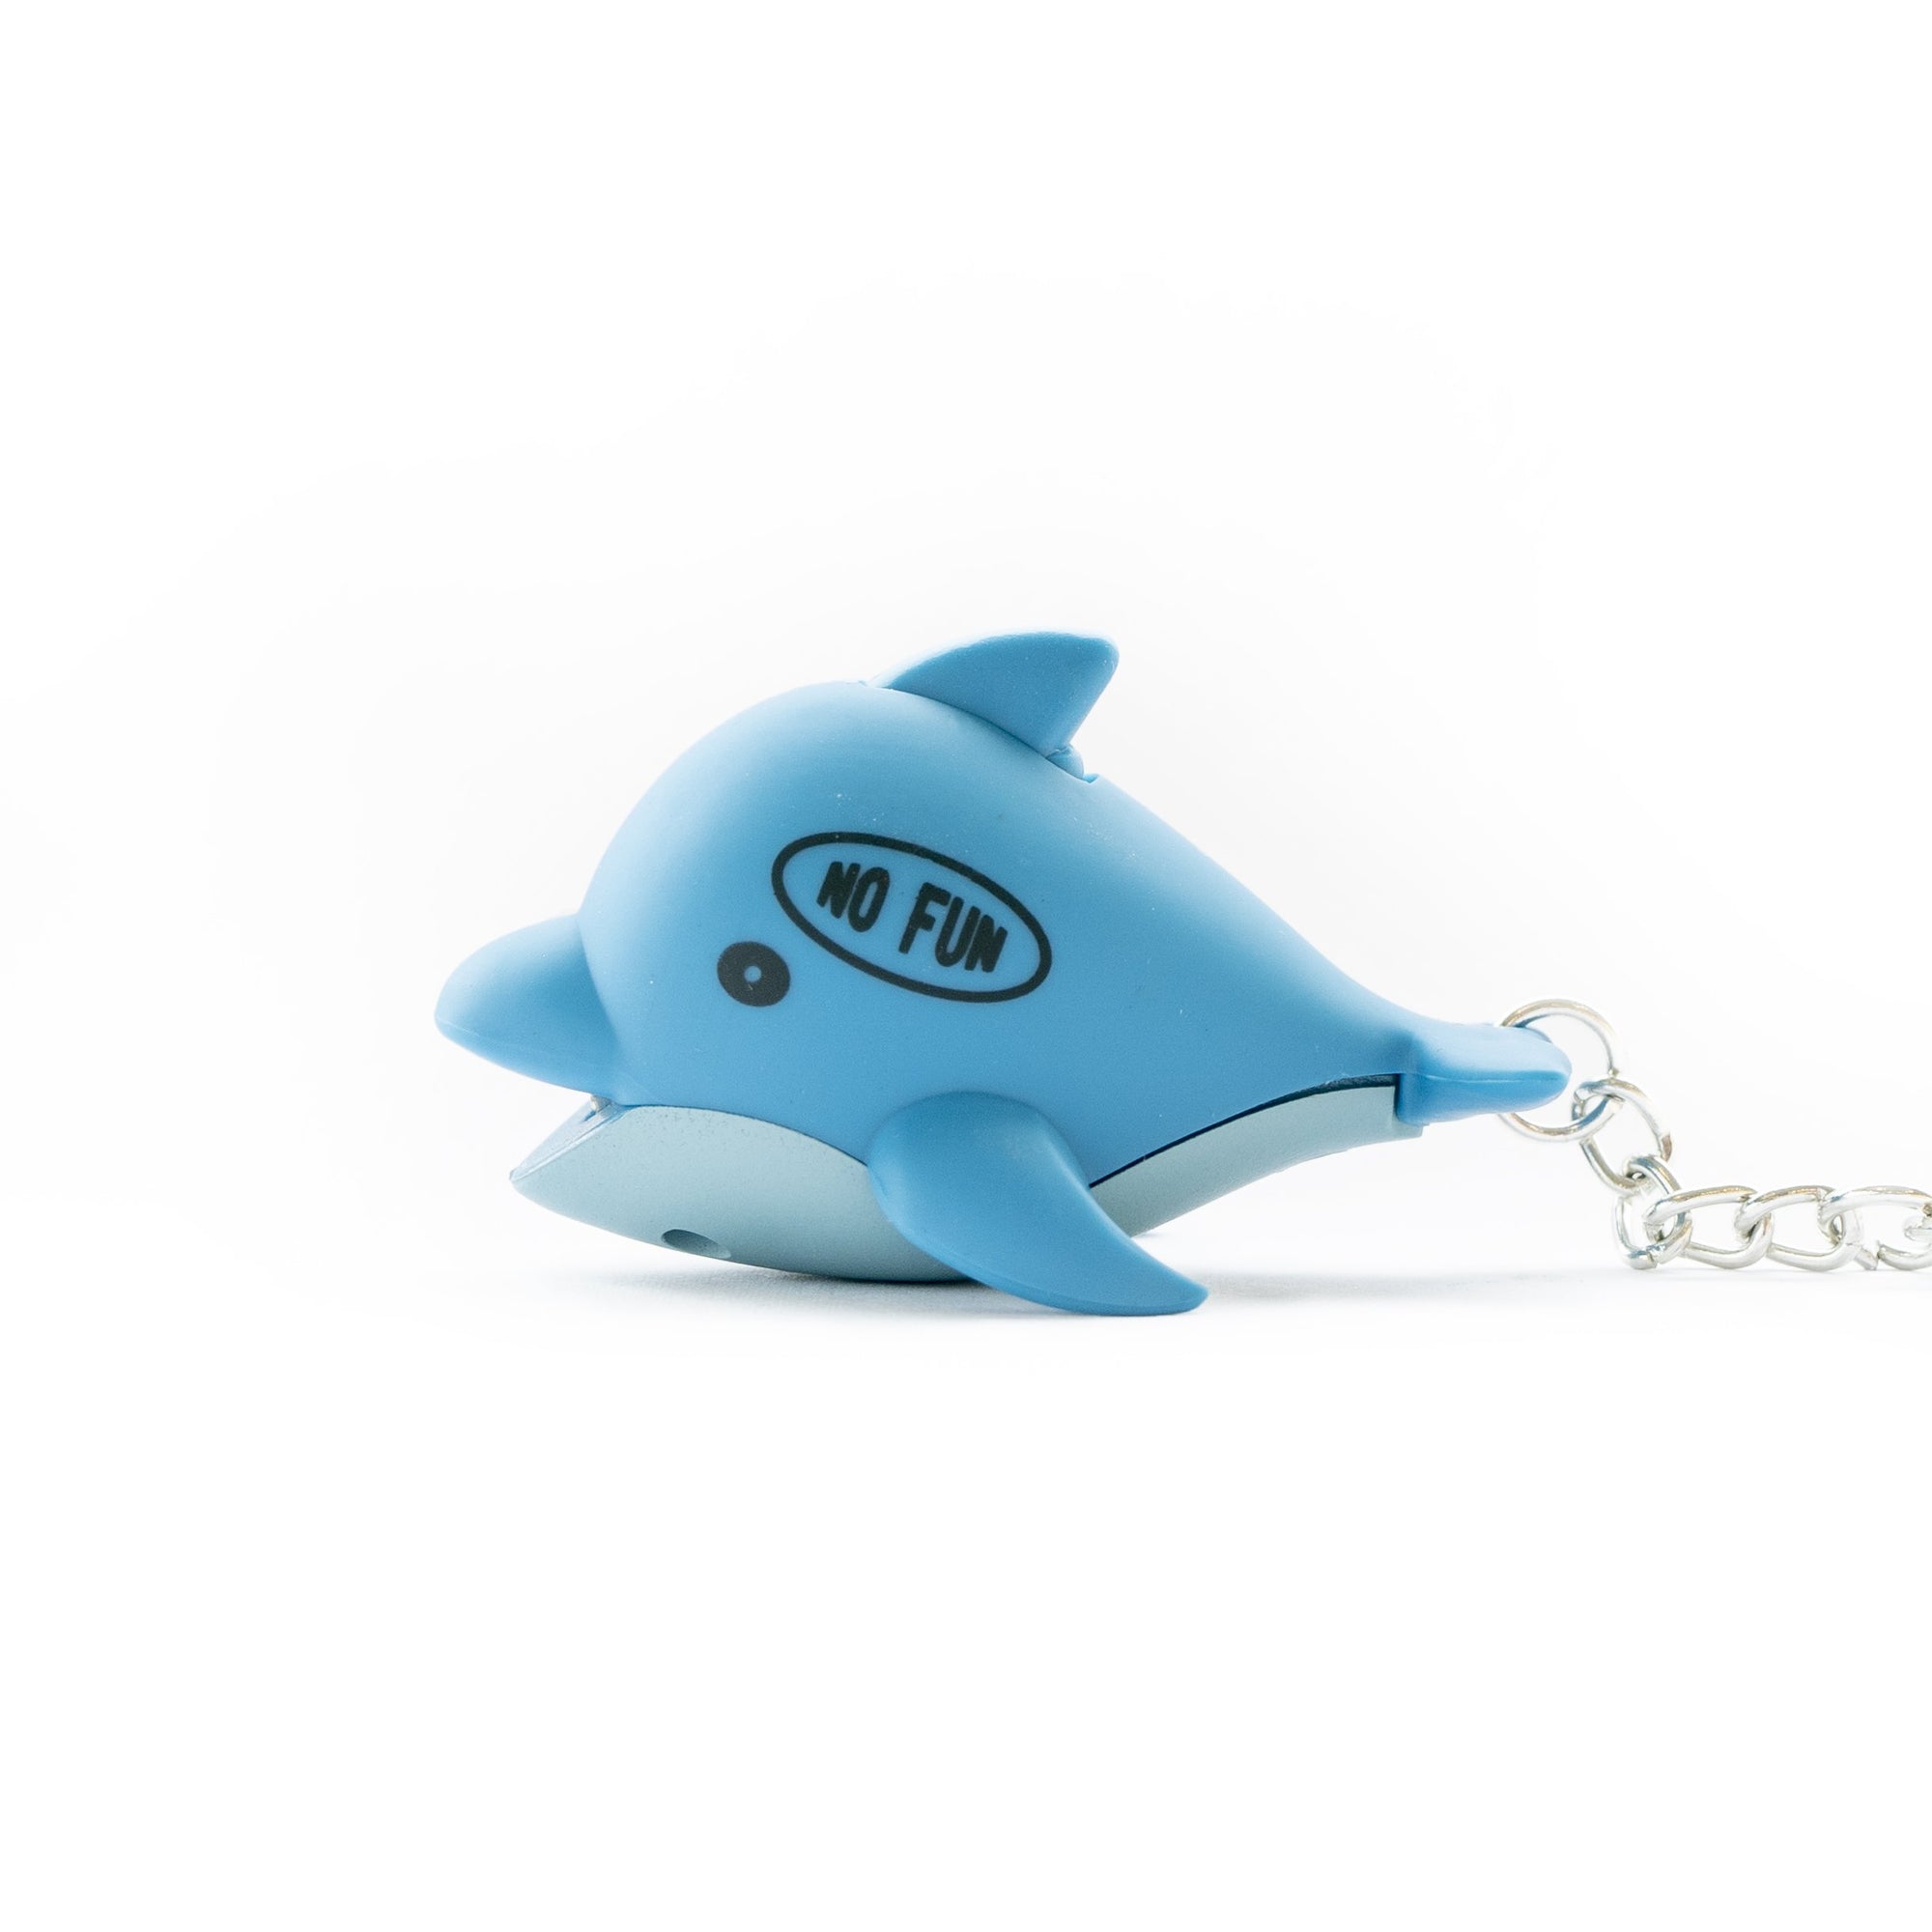 Dolphin keychain that lights up when pressed. No Fun® logo on left side of dolphin.